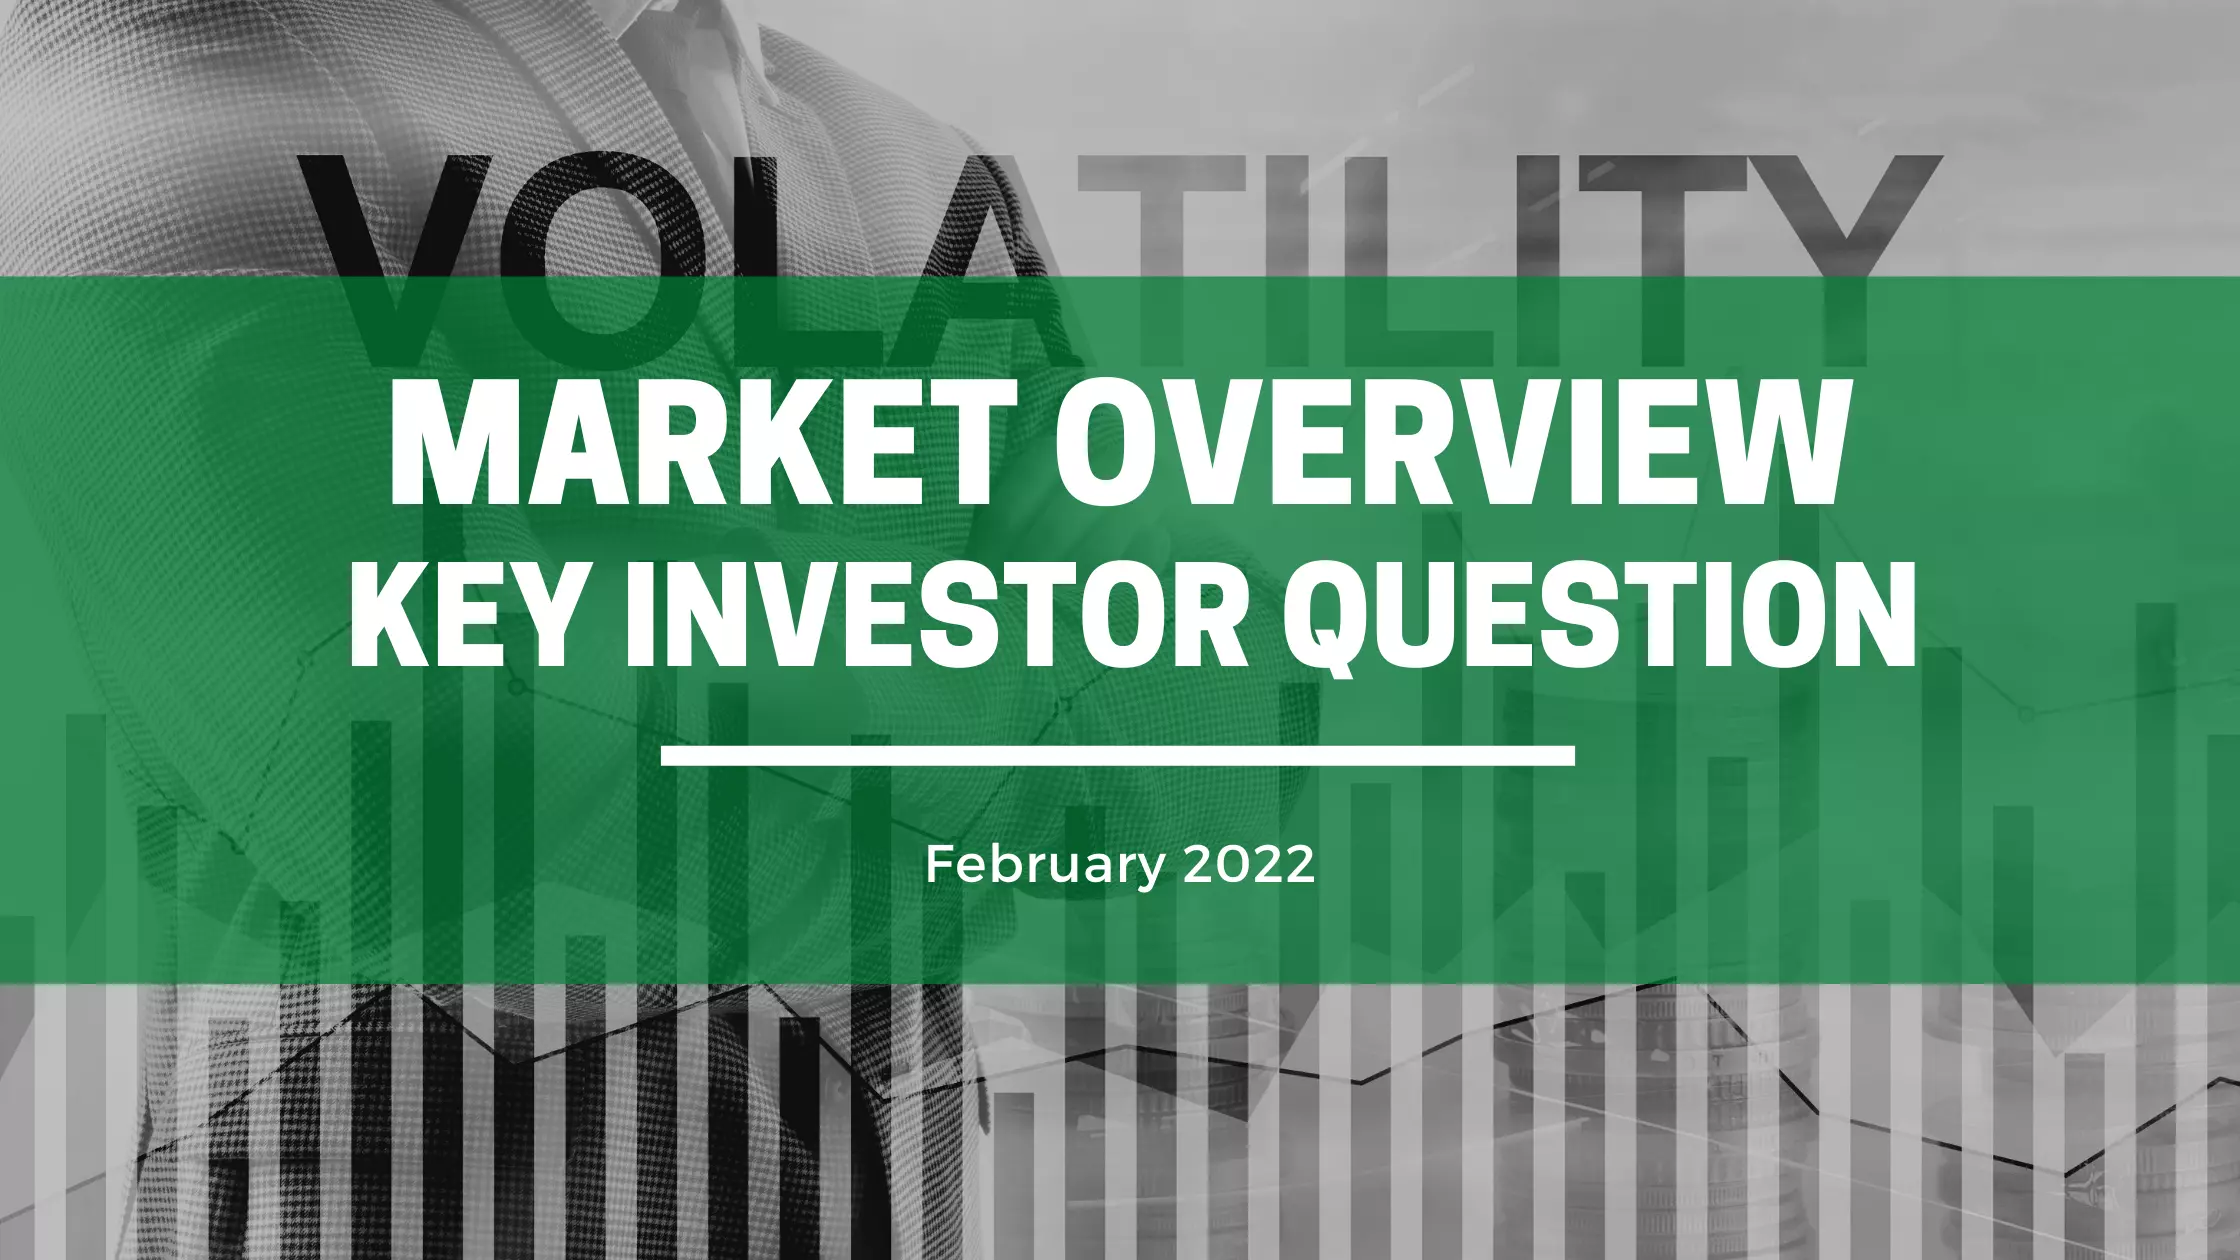 Market Overview - Key Investor Questions